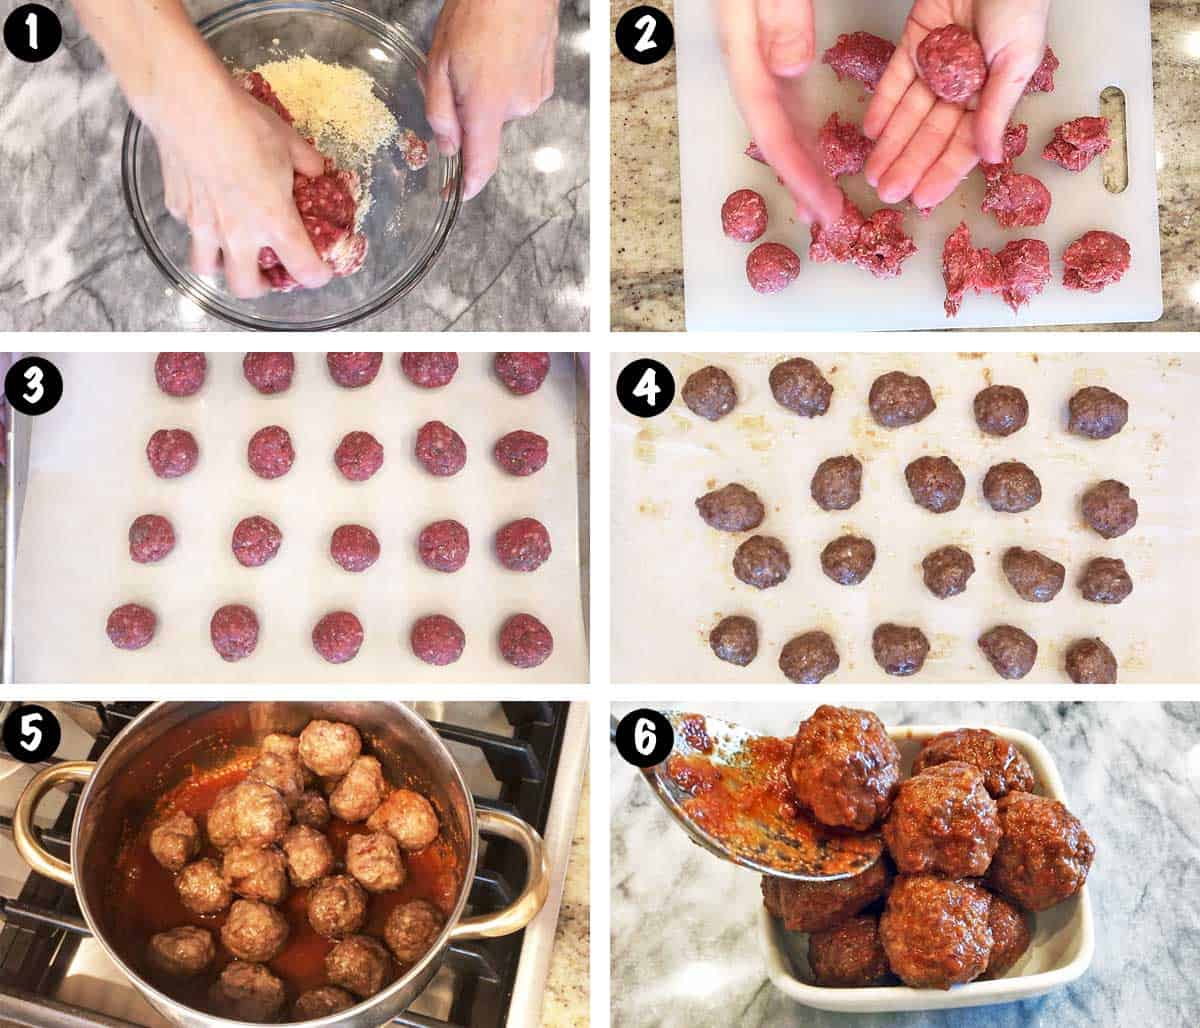 A six-photo collage showing the steps for making baked meatballs. 